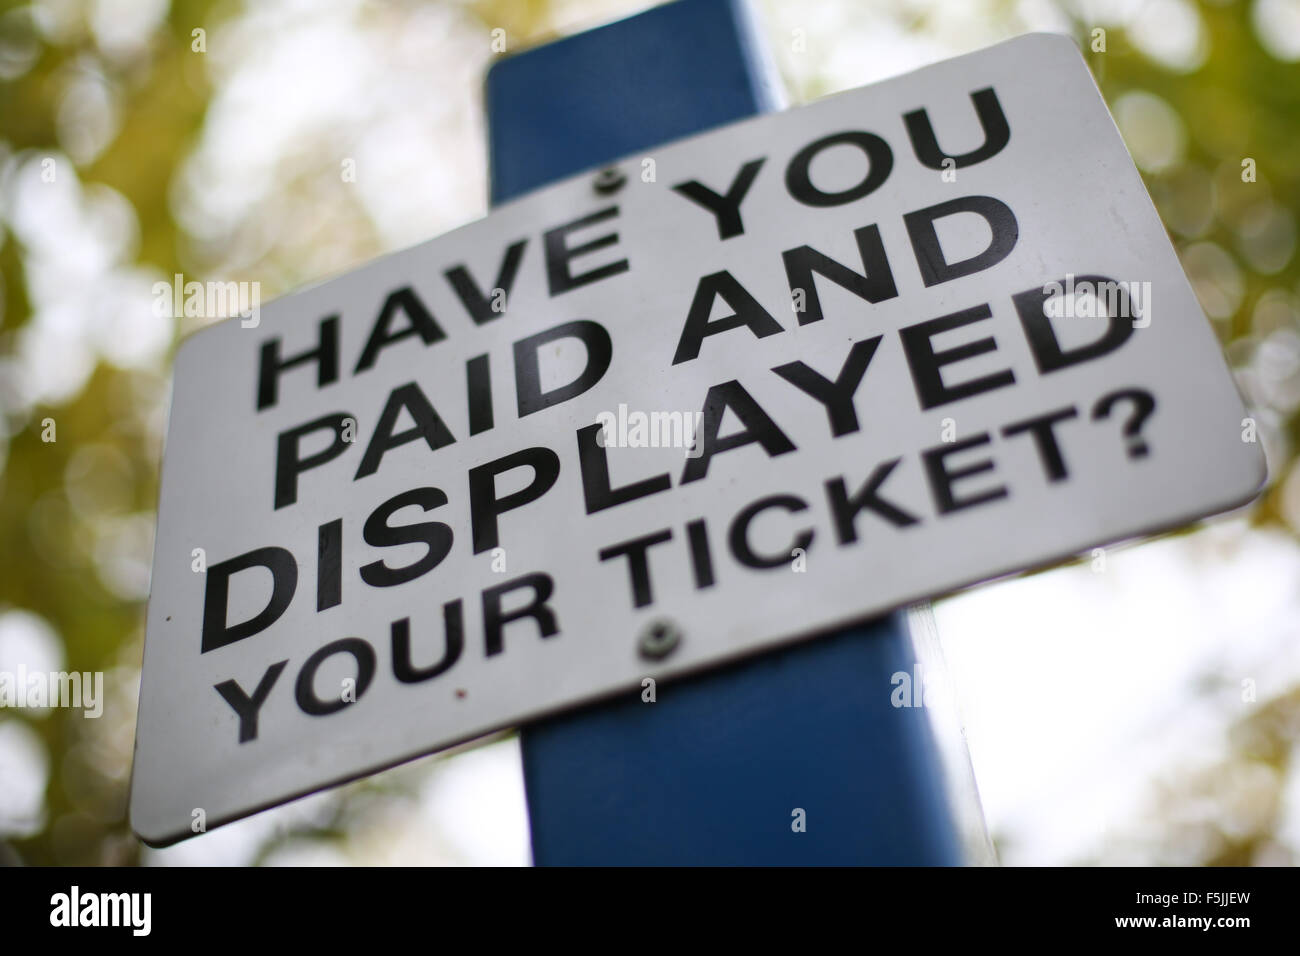 A pay and display parking sign in Bradford, West Yorkshire, Britain. Stock Photo